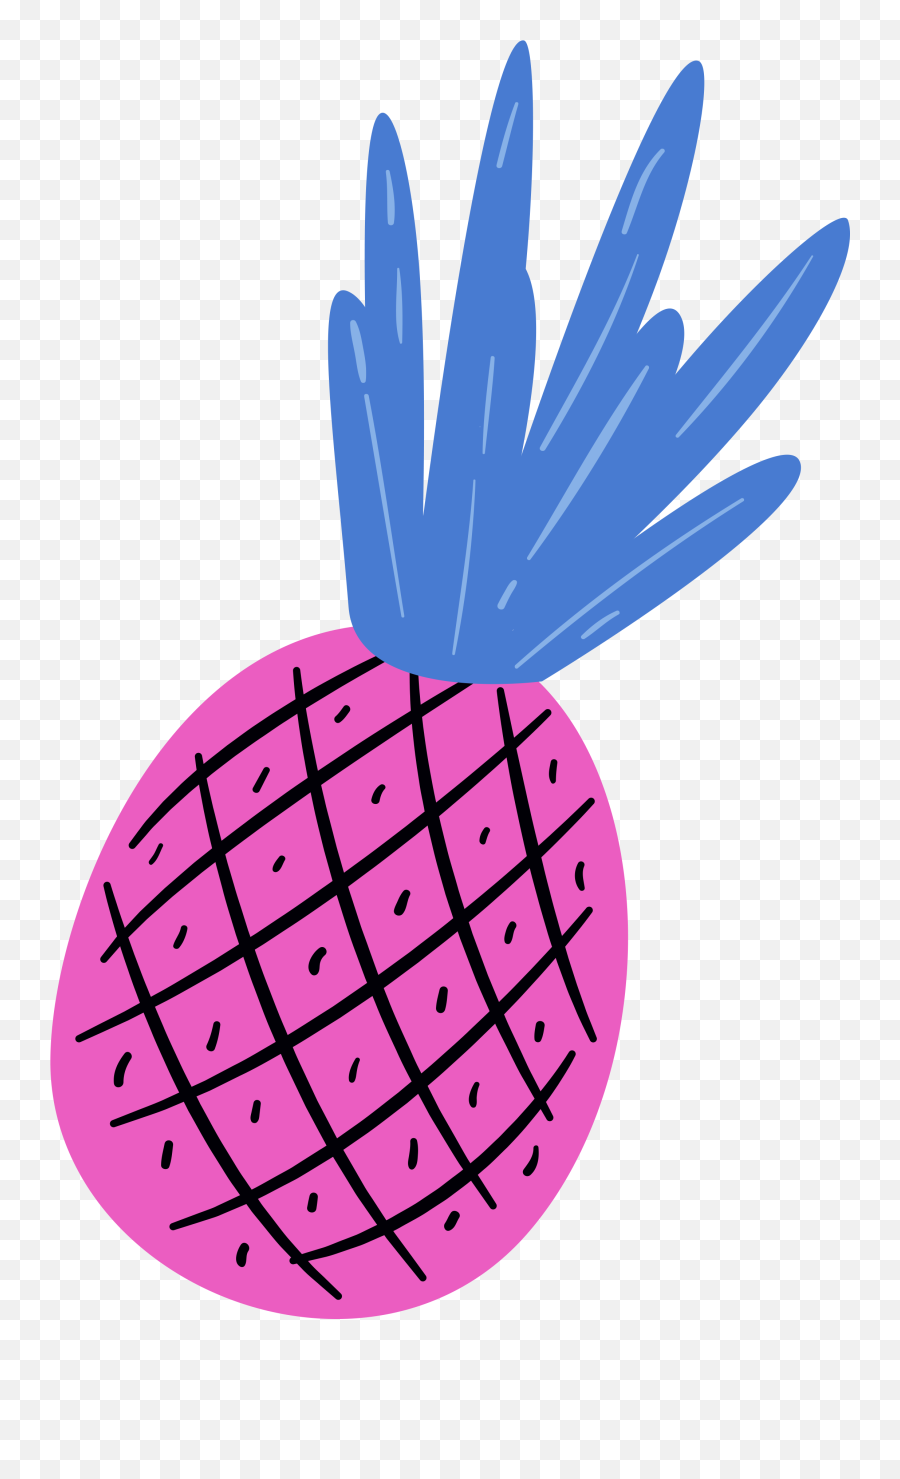 Leave - Free Colorful Pineapple Clipart Png Transparent Png Color Ful Pineapple Png Emoji,Pineapple Clipart